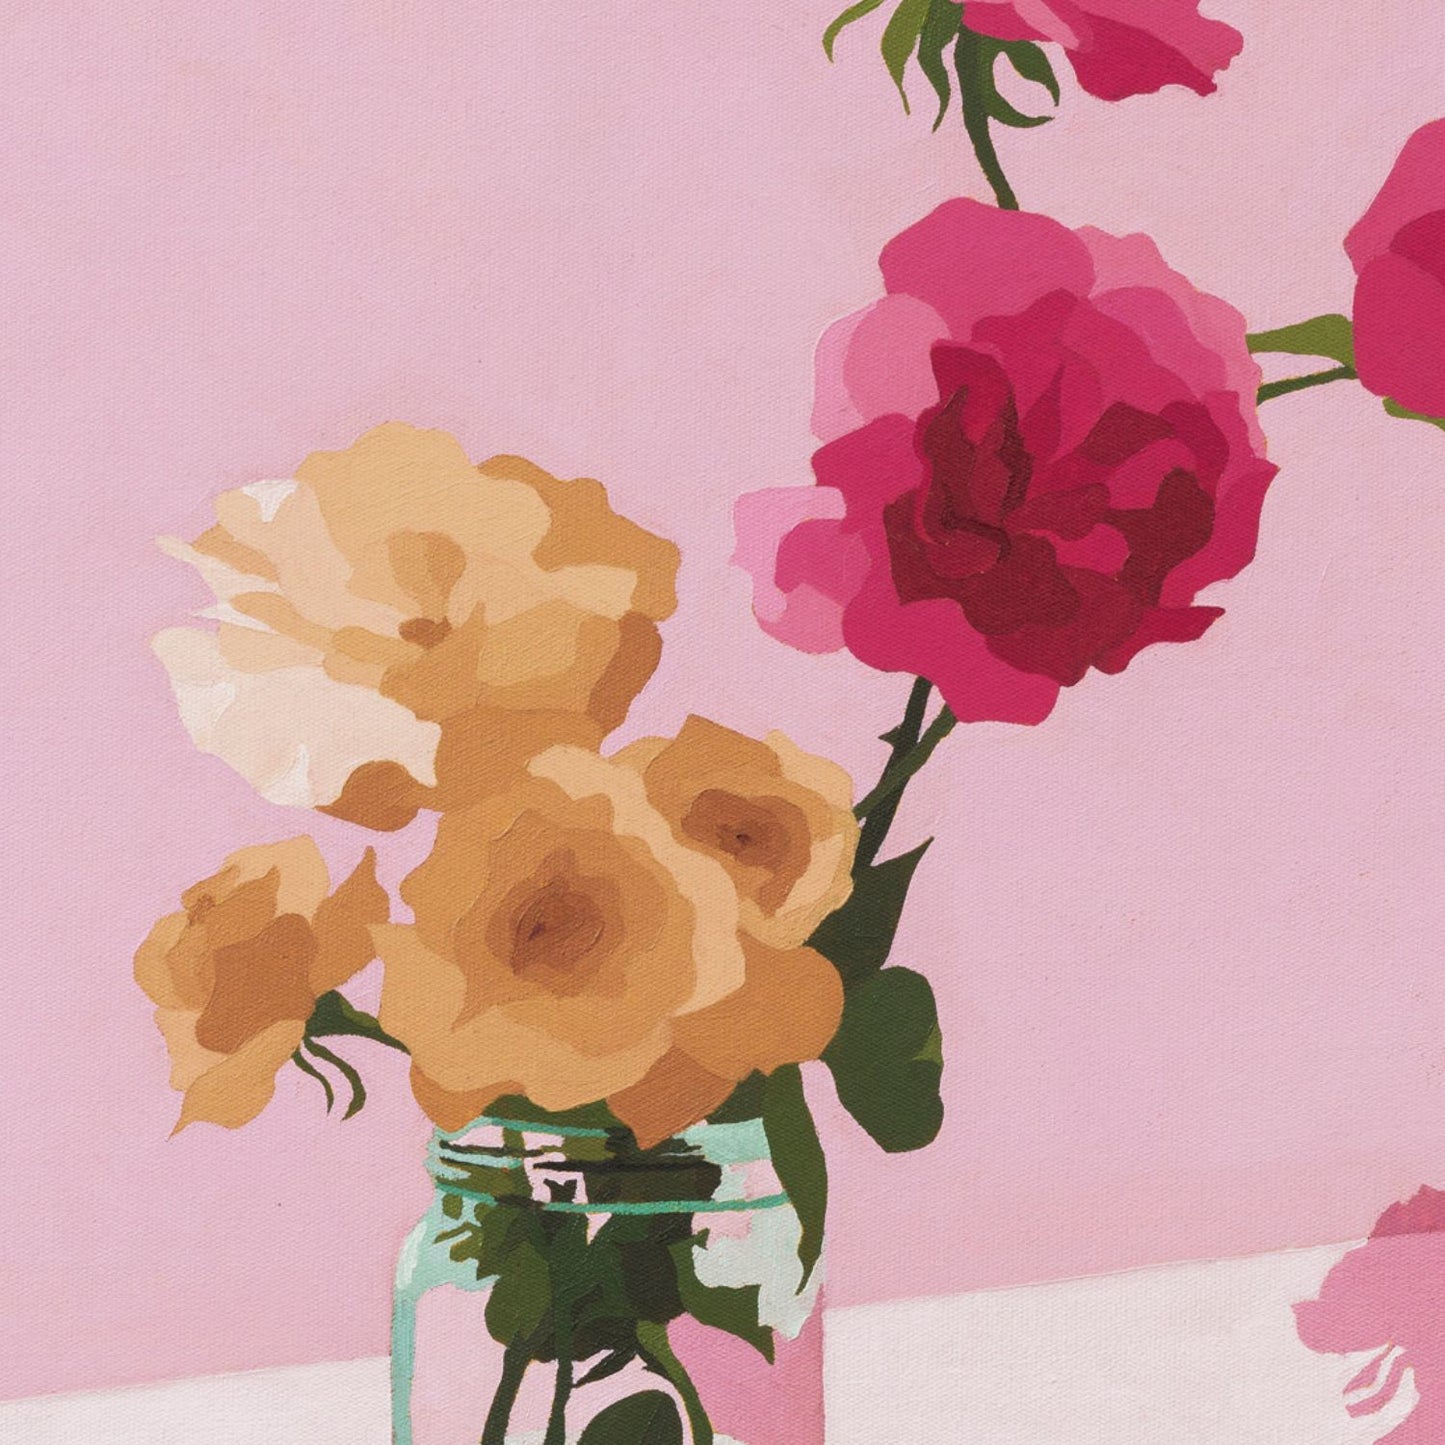 original oil painting of roses in a vase on a soft pink background